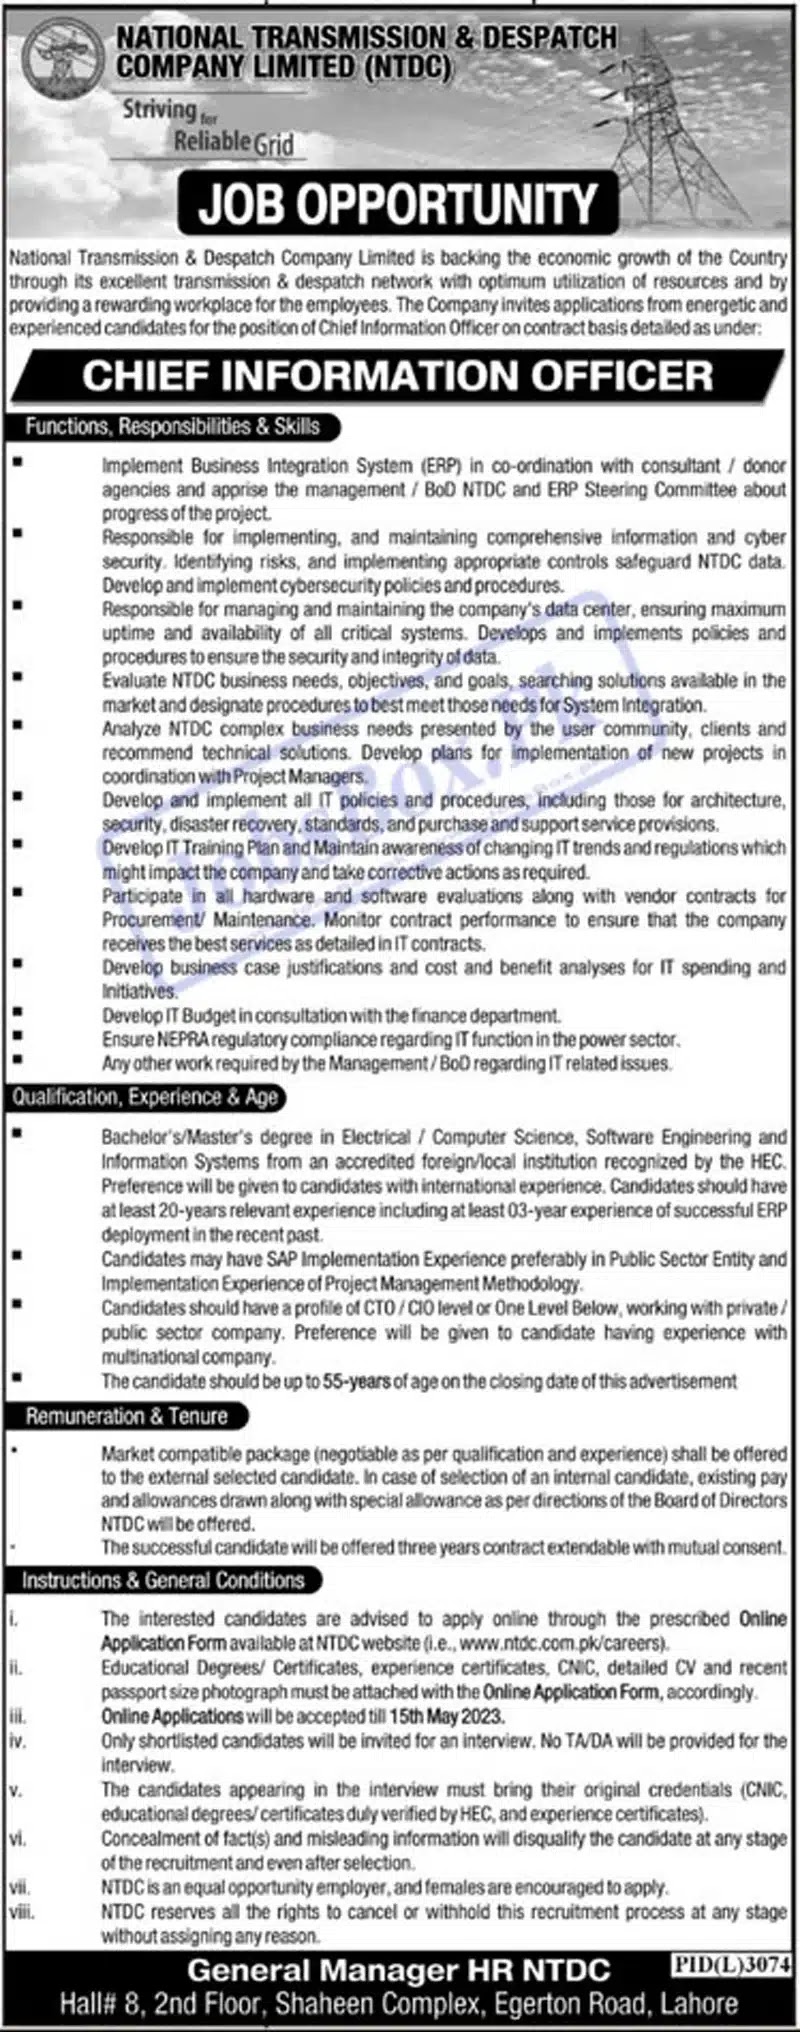 National Transmission & Dispatch Company Limited  NTDC jobs in 2023